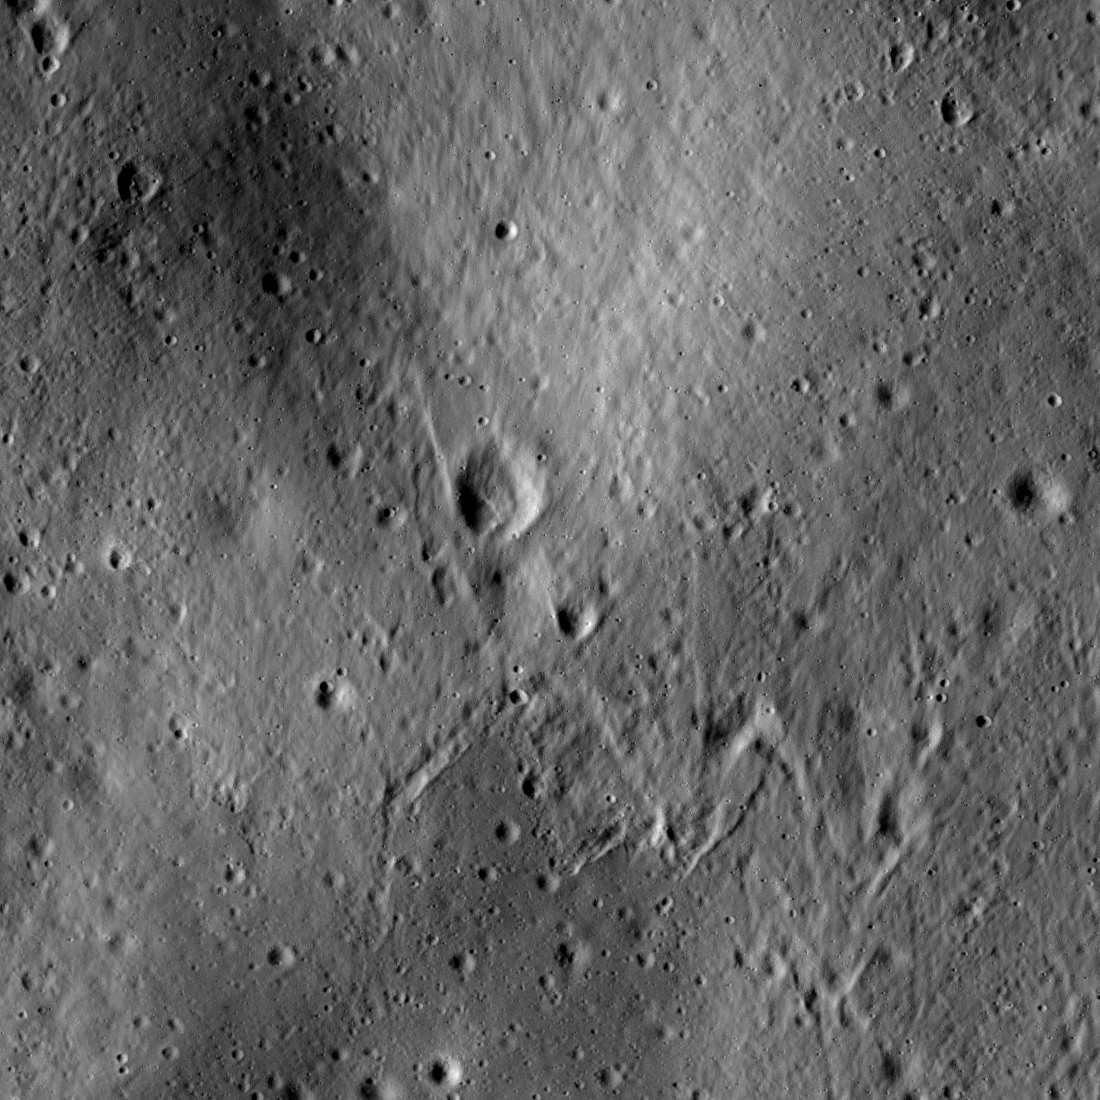 secondary craters